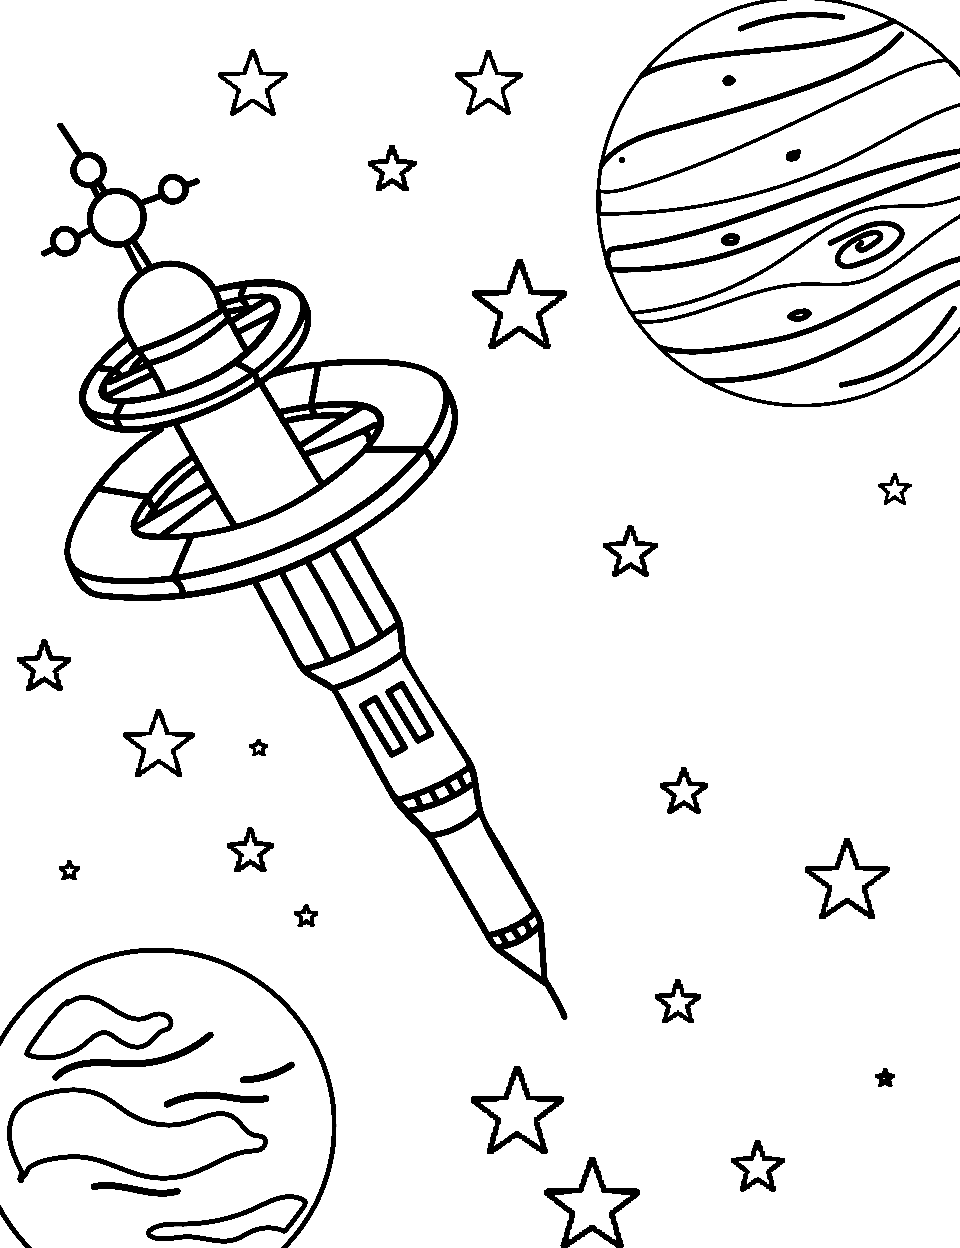 Spacestation's Silent Watch Coloring Page - A space station hovering in outer space keeping watch on the planets around it.